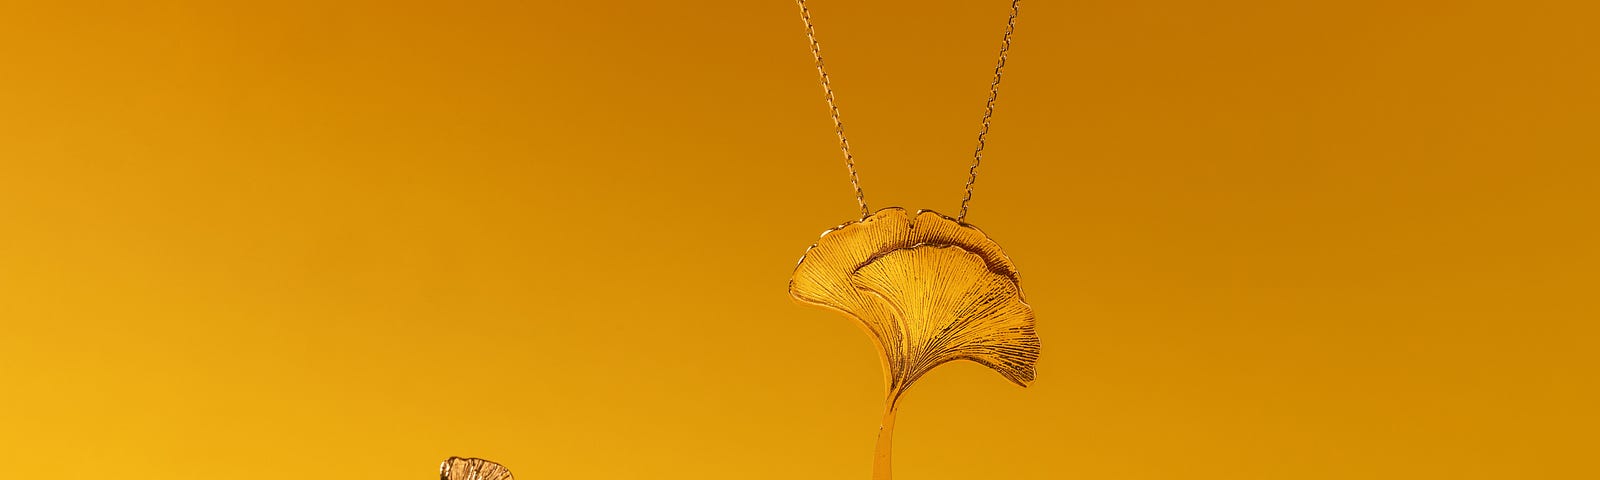 gold jewelry against a golden background